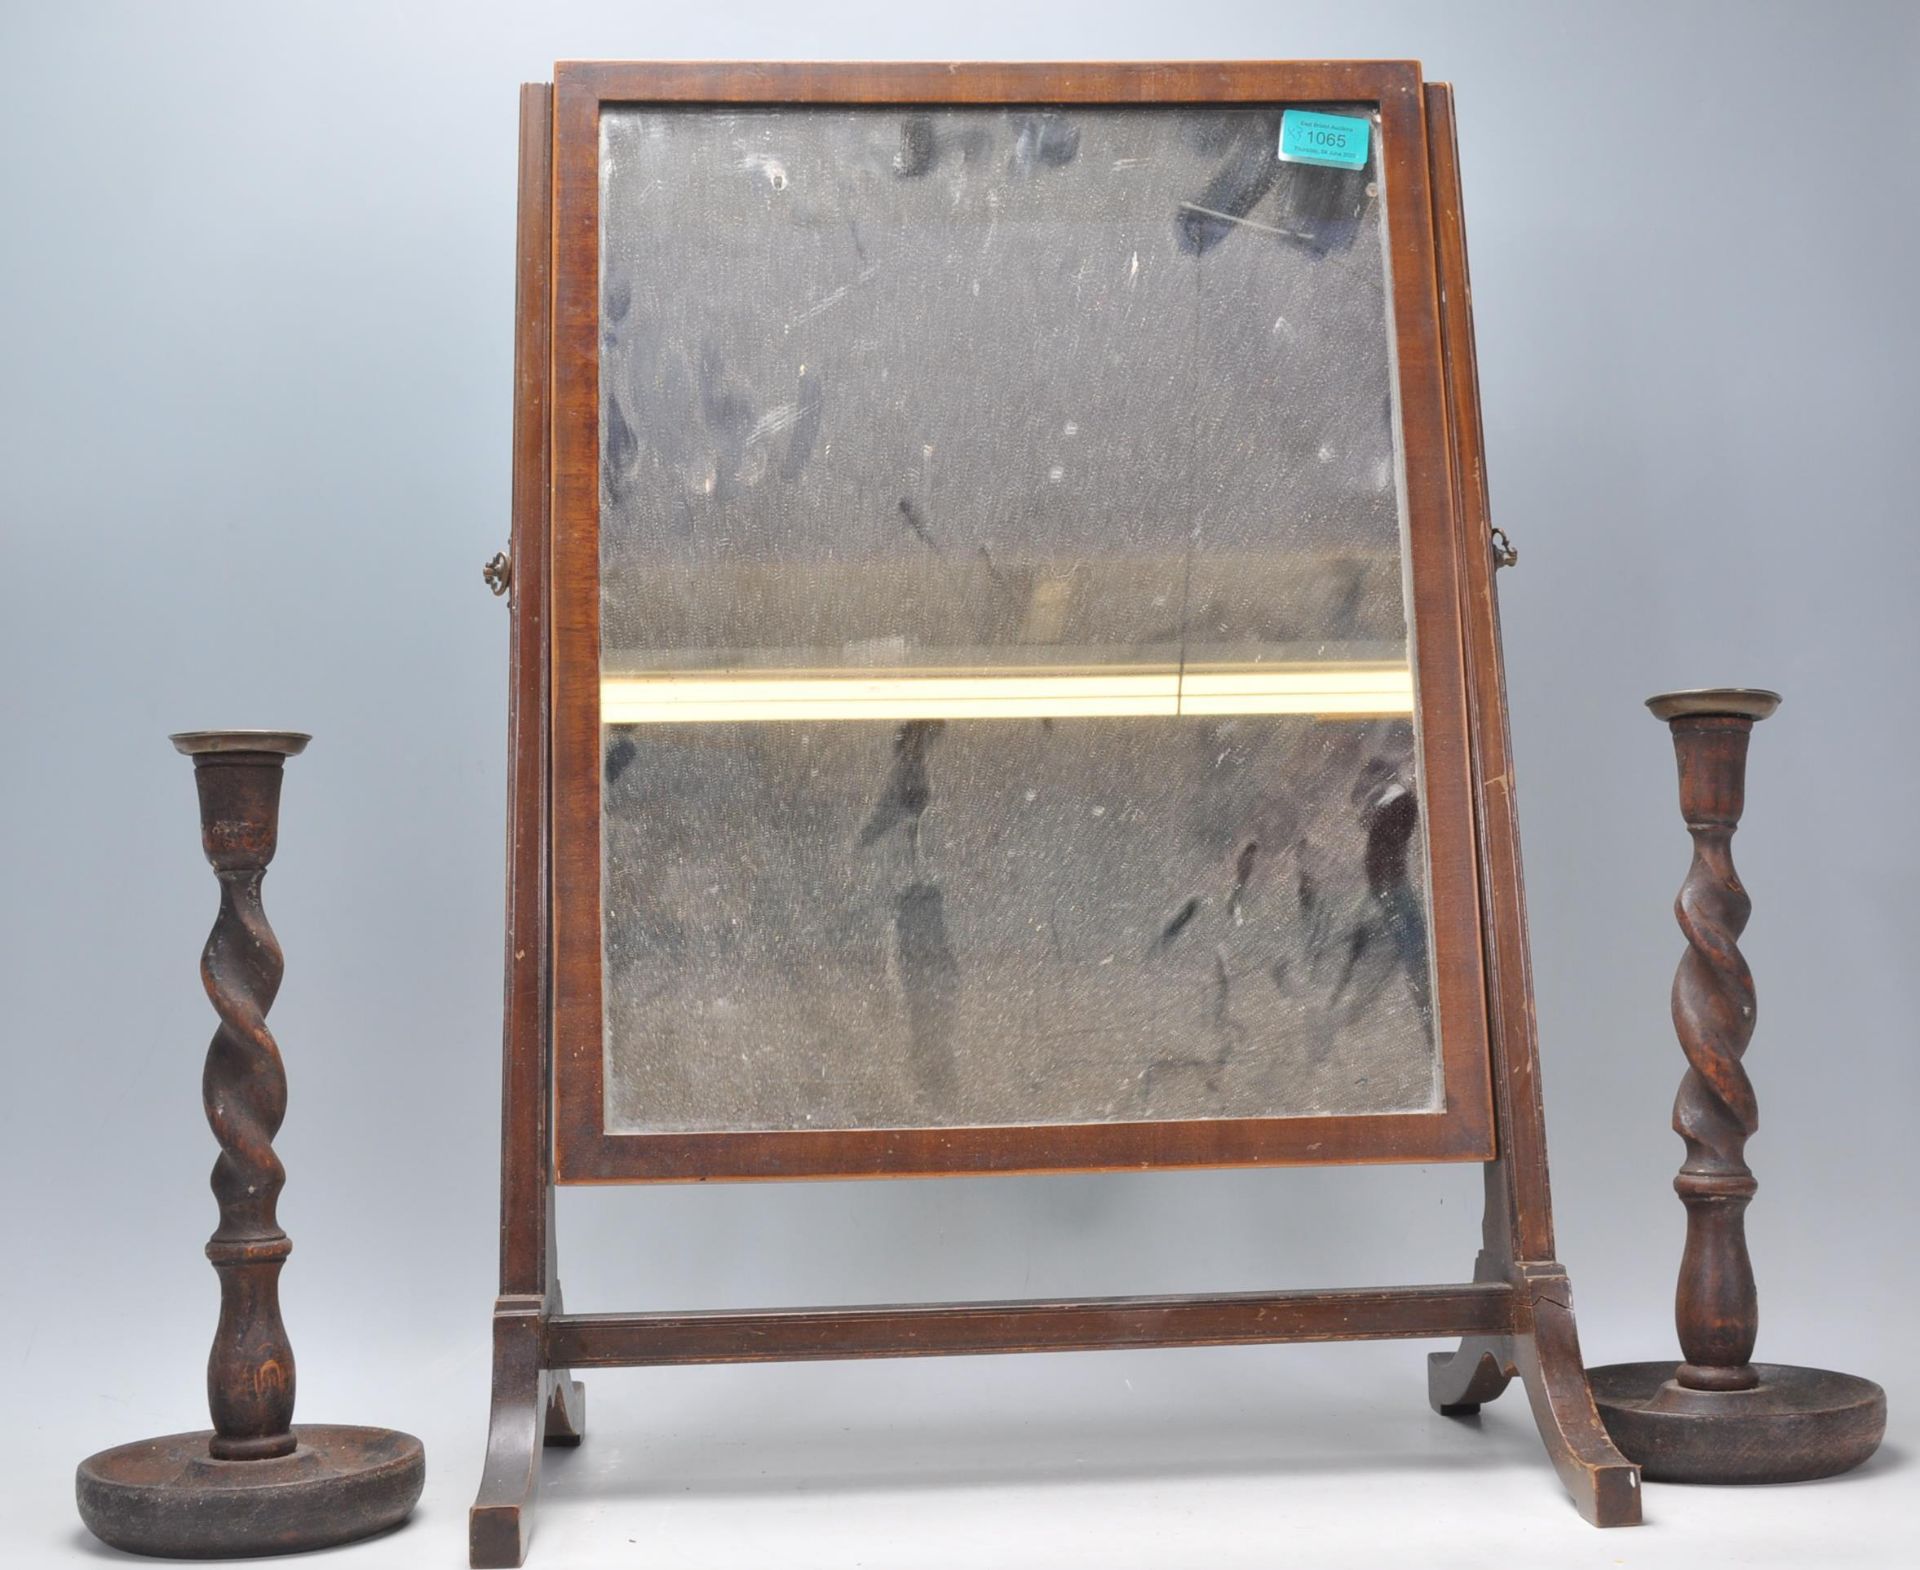 A 19th century George III mahogany toilet swing mirror of square form raised on a splayed leg